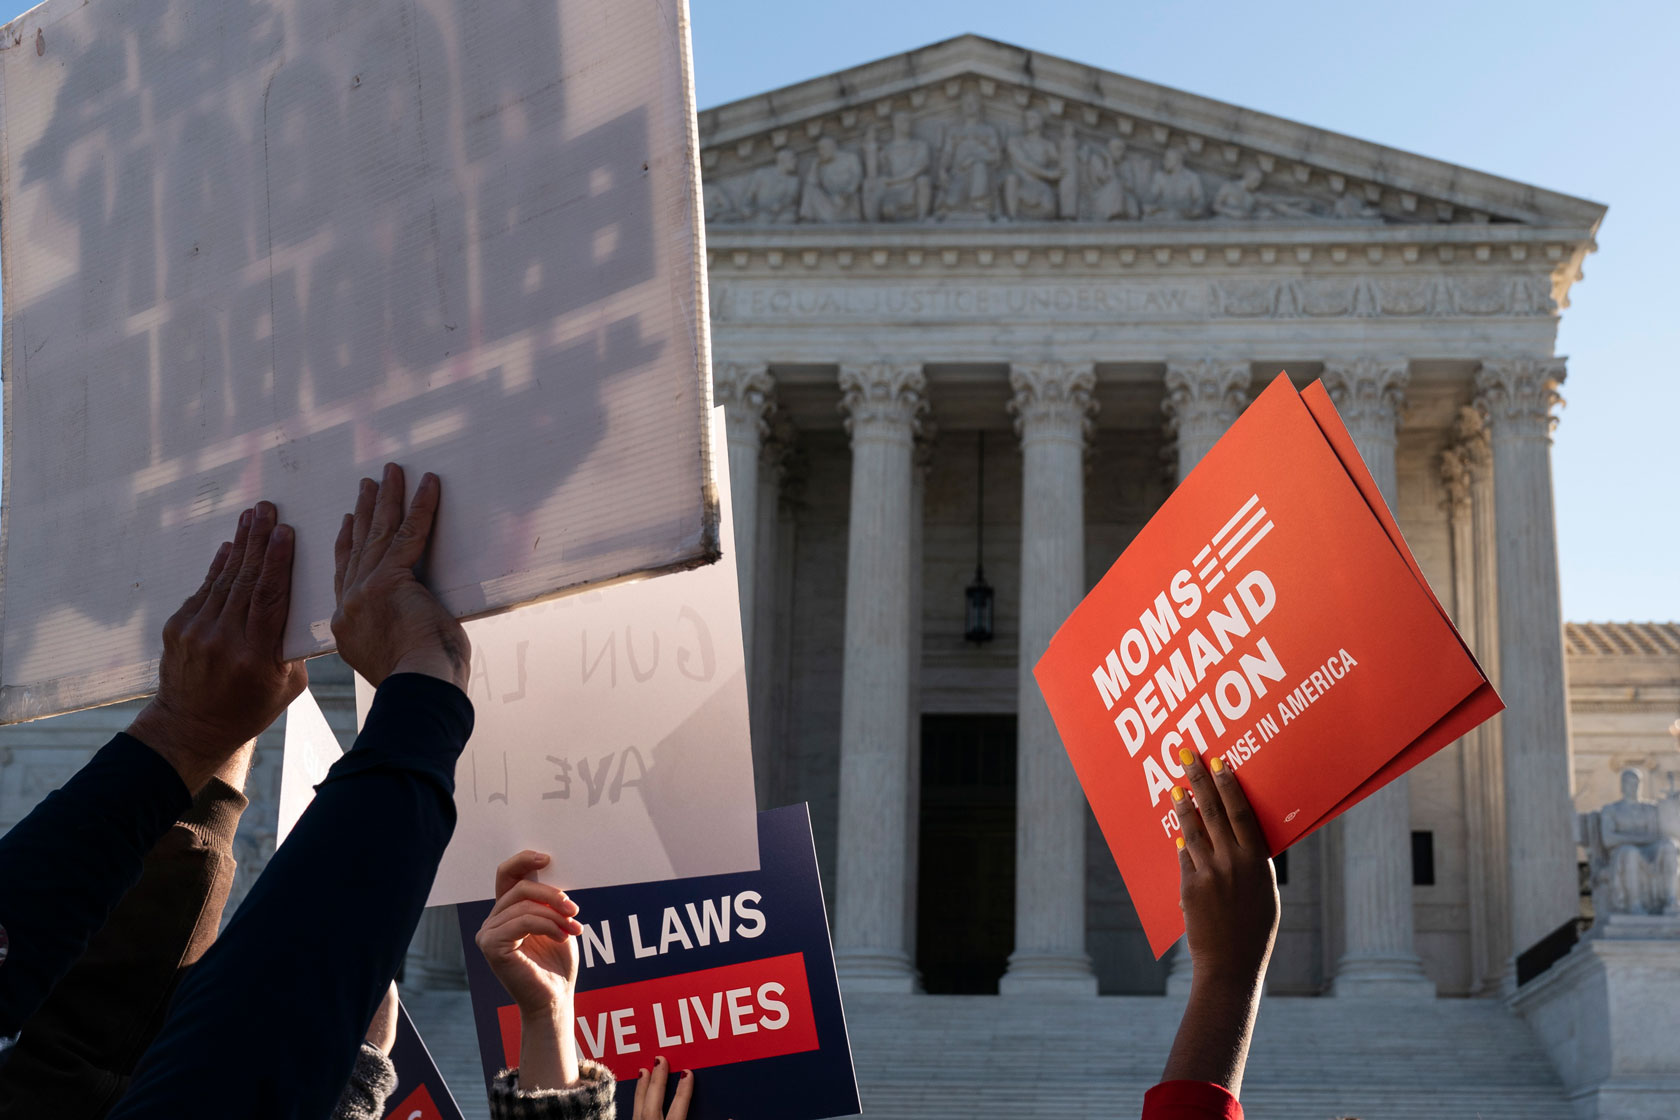 Protestors' hands hold up signs promoting gun regulation in front of the Supreme Court.